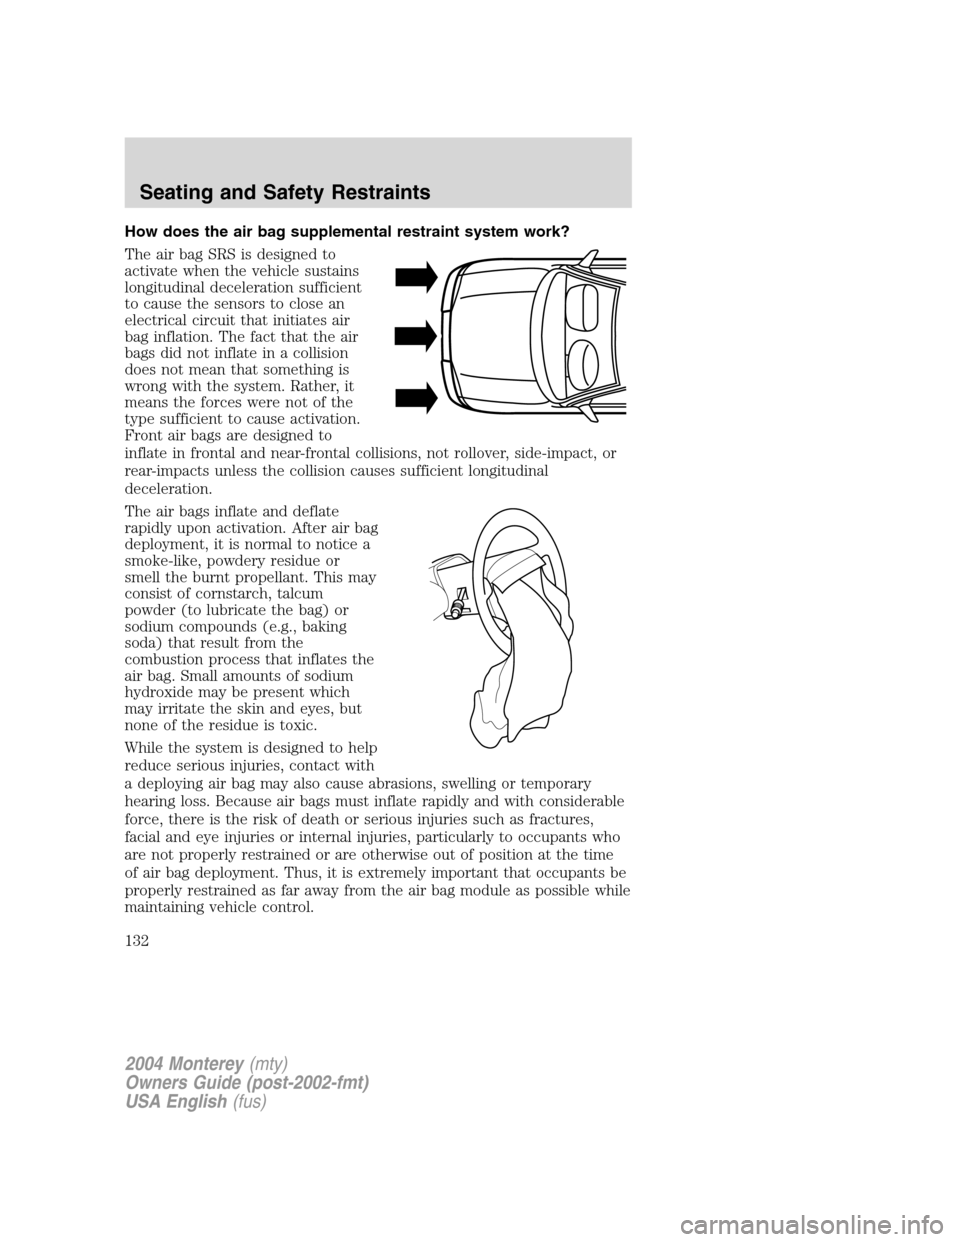 Mercury Monterey 2004  Owners Manuals How does the air bag supplemental restraint system work?
The air bag SRS is designed to
activate when the vehicle sustains
longitudinal deceleration sufficient
to cause the sensors to close an
electri